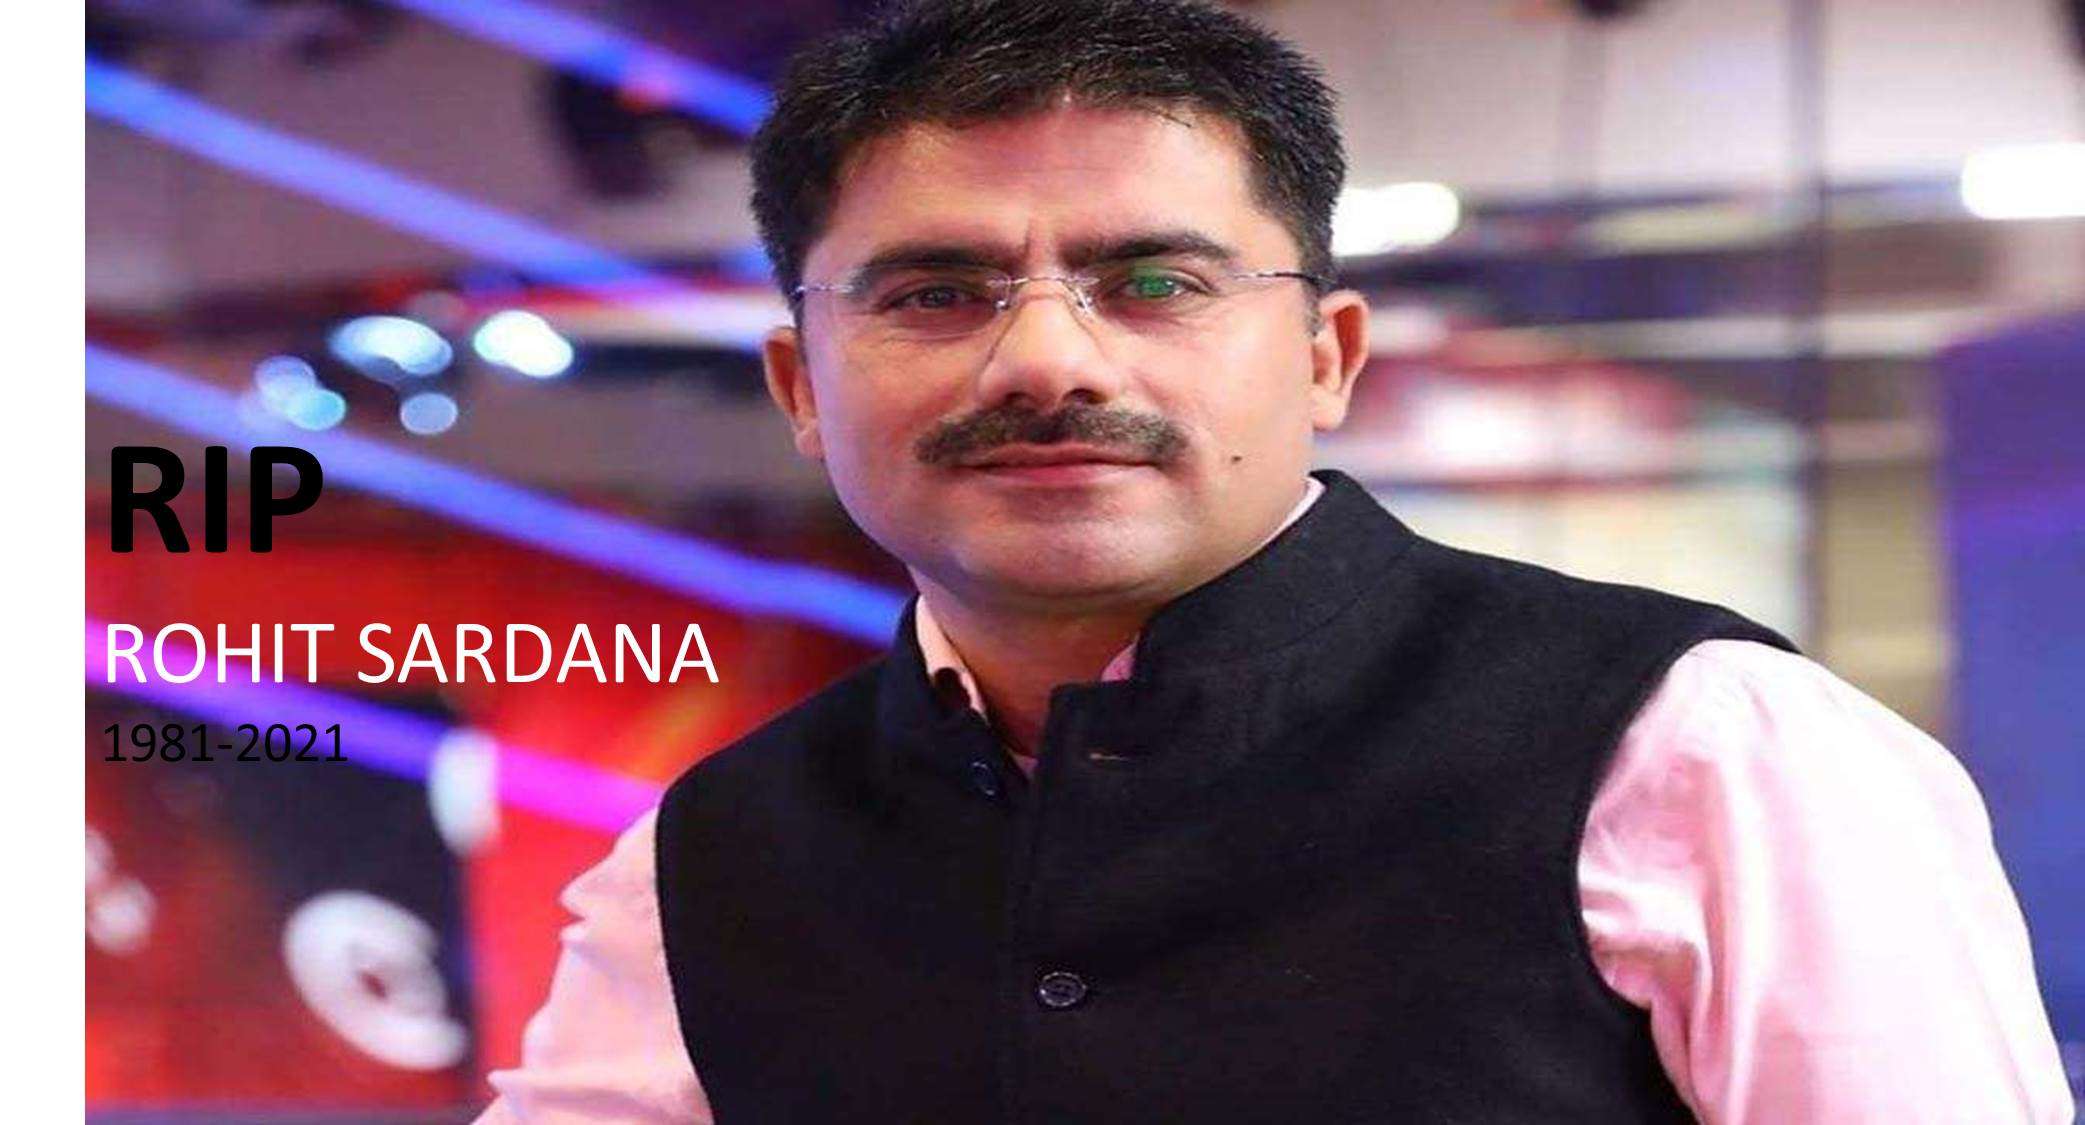 40 year old News Anchor Rohit Sardana passes away after being diagnosed with COVID19